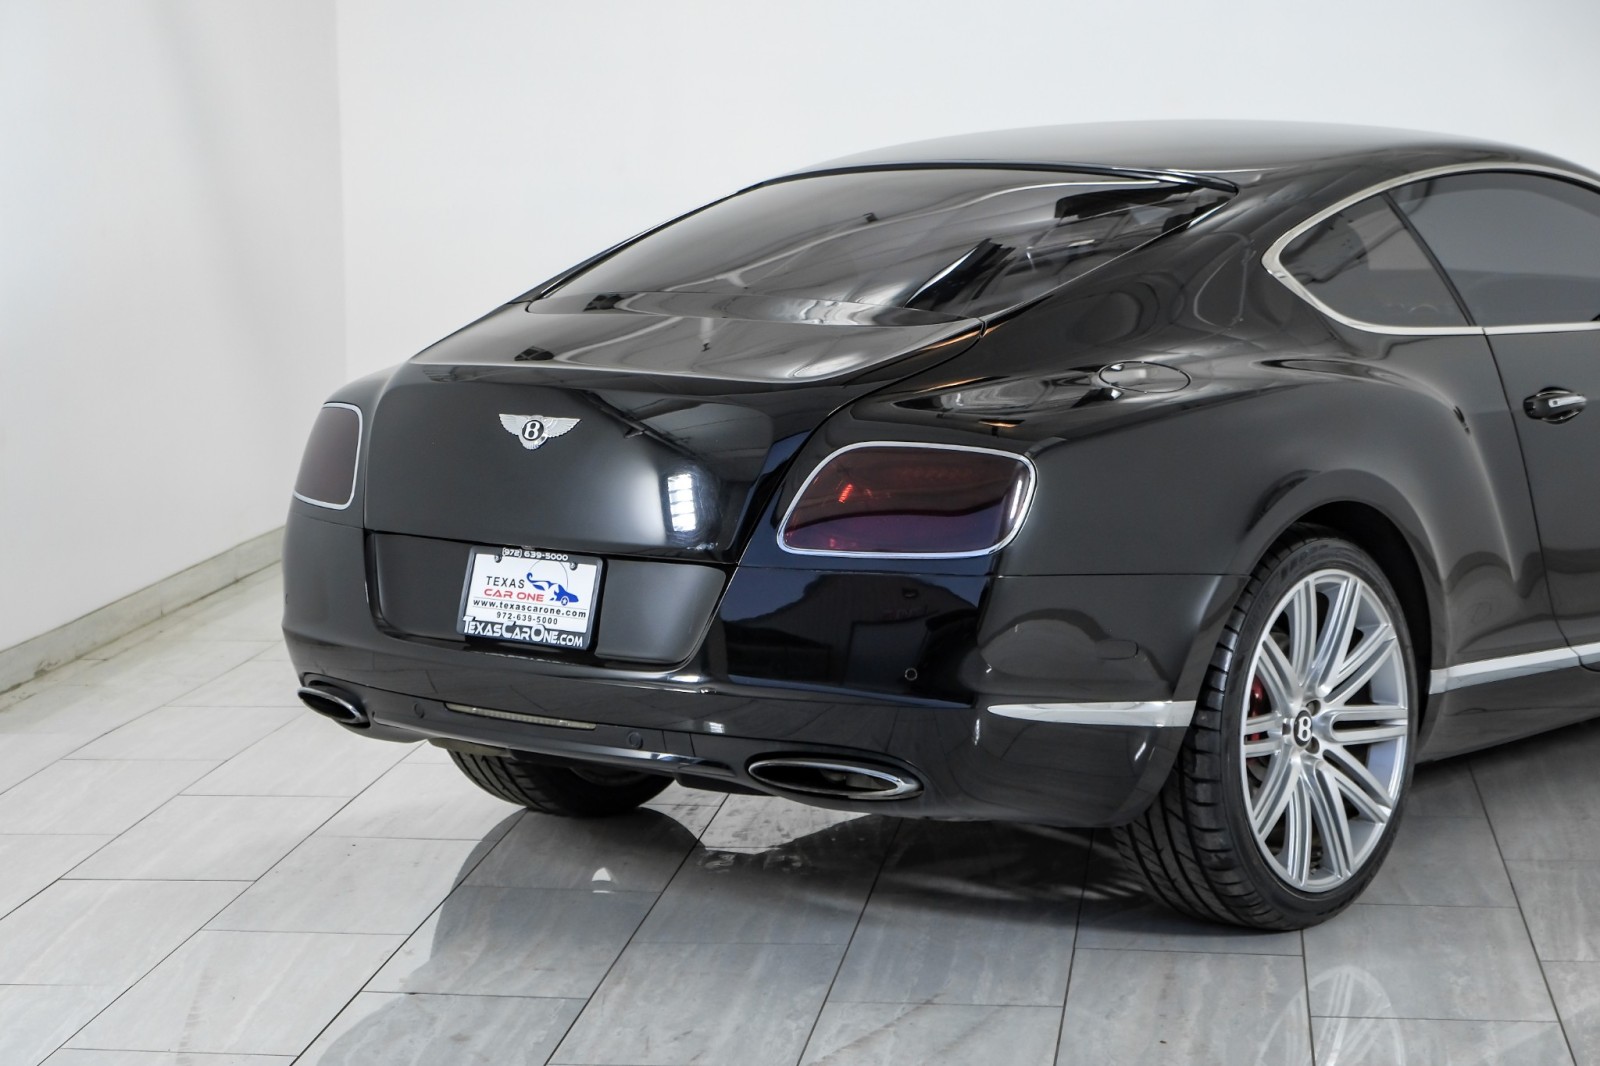 2013 Bentley Continental GT COUPE AWD W12 LA MANS EDITION 1 OF 48 NAVIGATION B 9